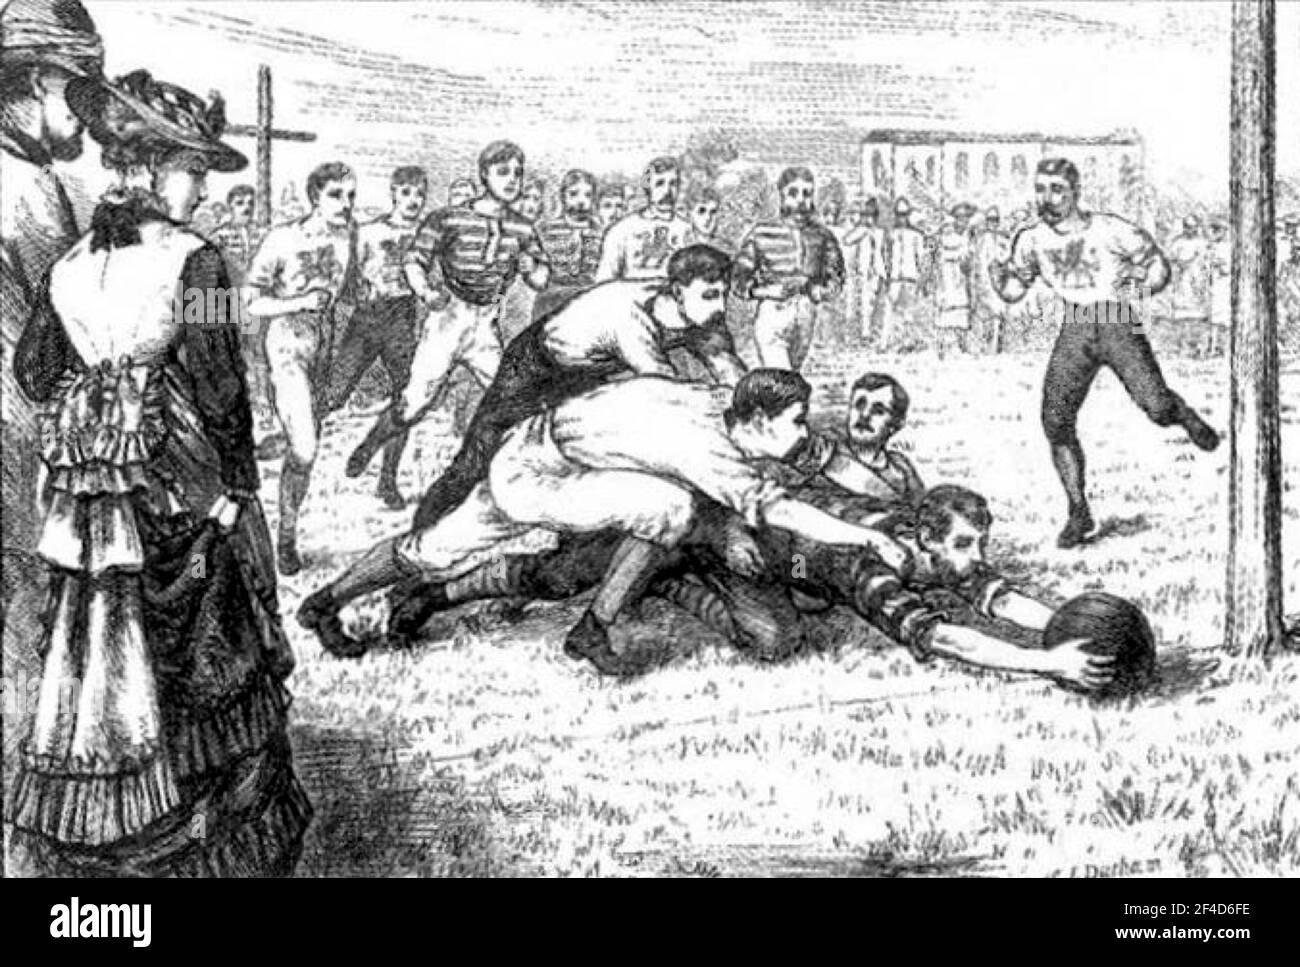 Europeans playing rugby football in Calcutta, India, 1875 Stock Photo